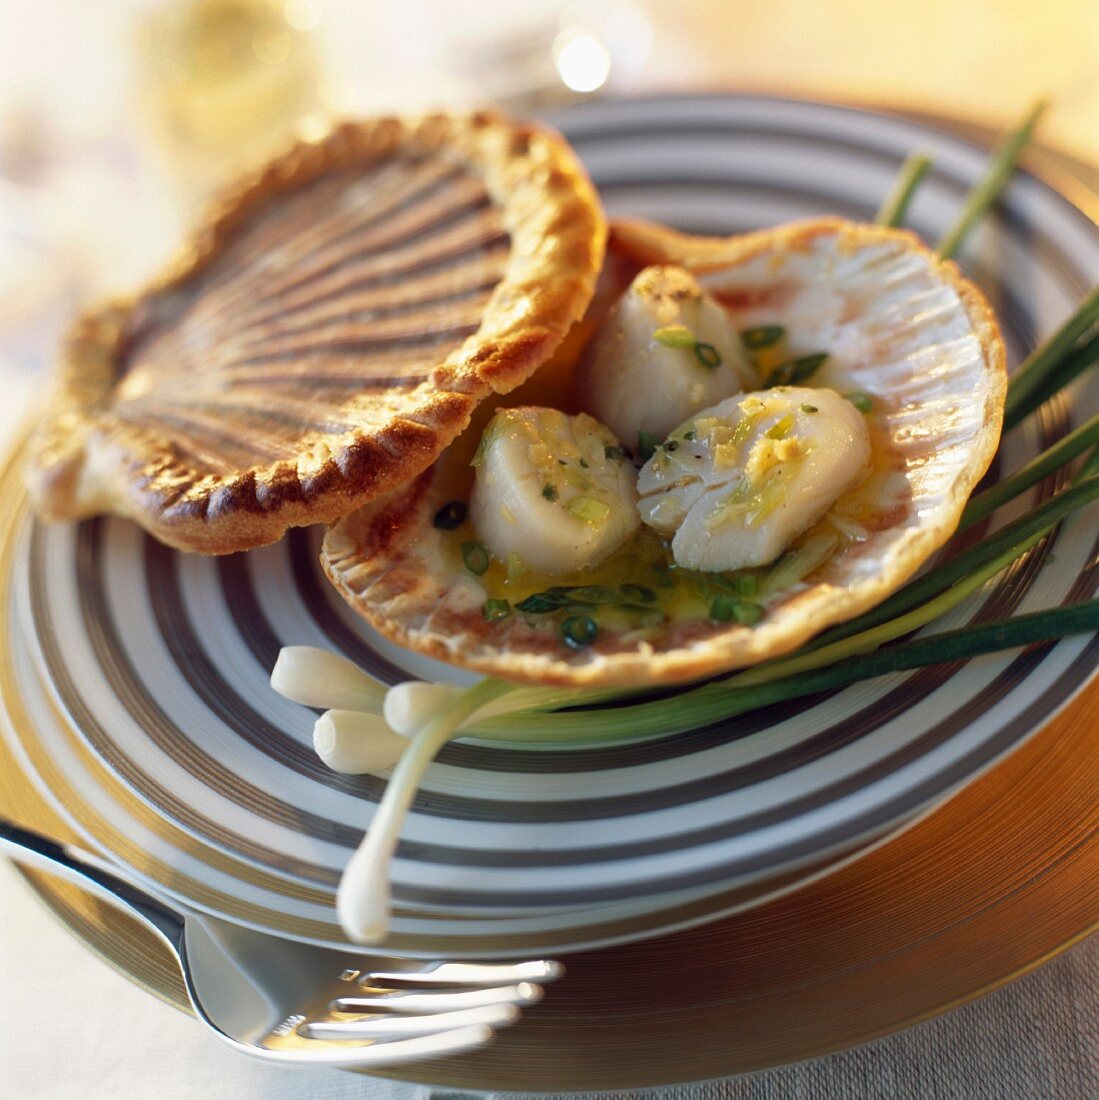 Scallops in shell with ginger and citronella butter